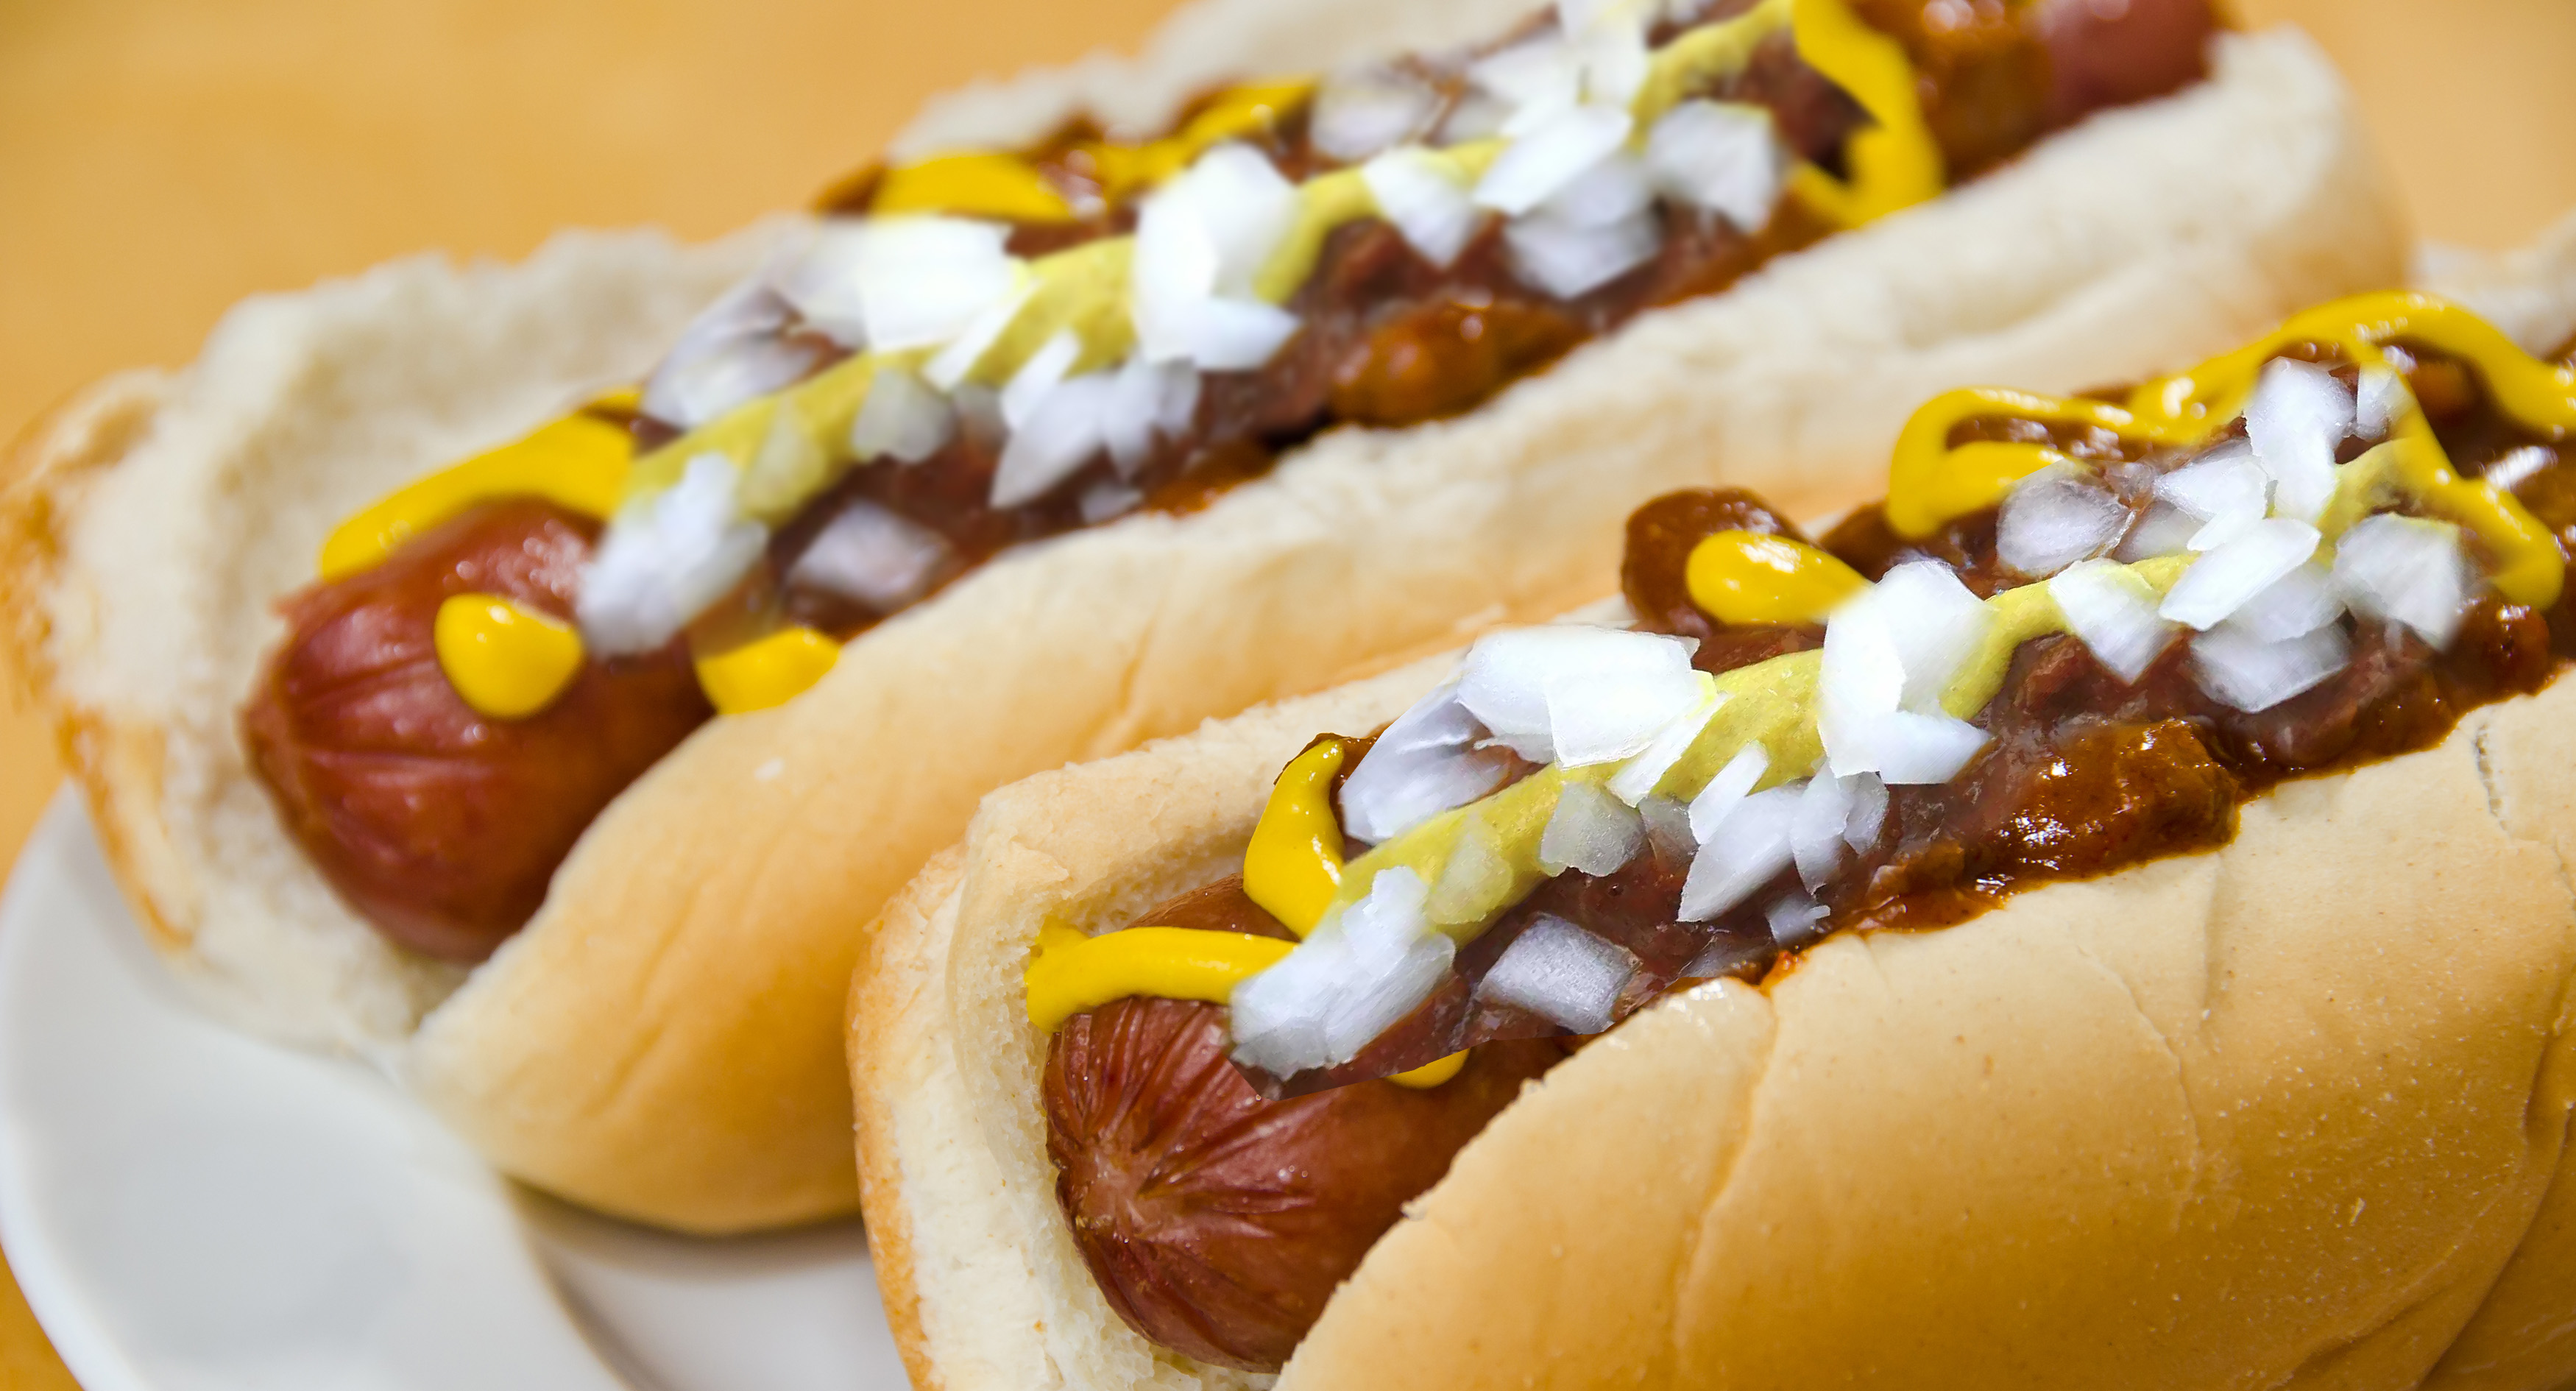 Coney Dog | Traditional Hot Dog From Michigan, United States of America